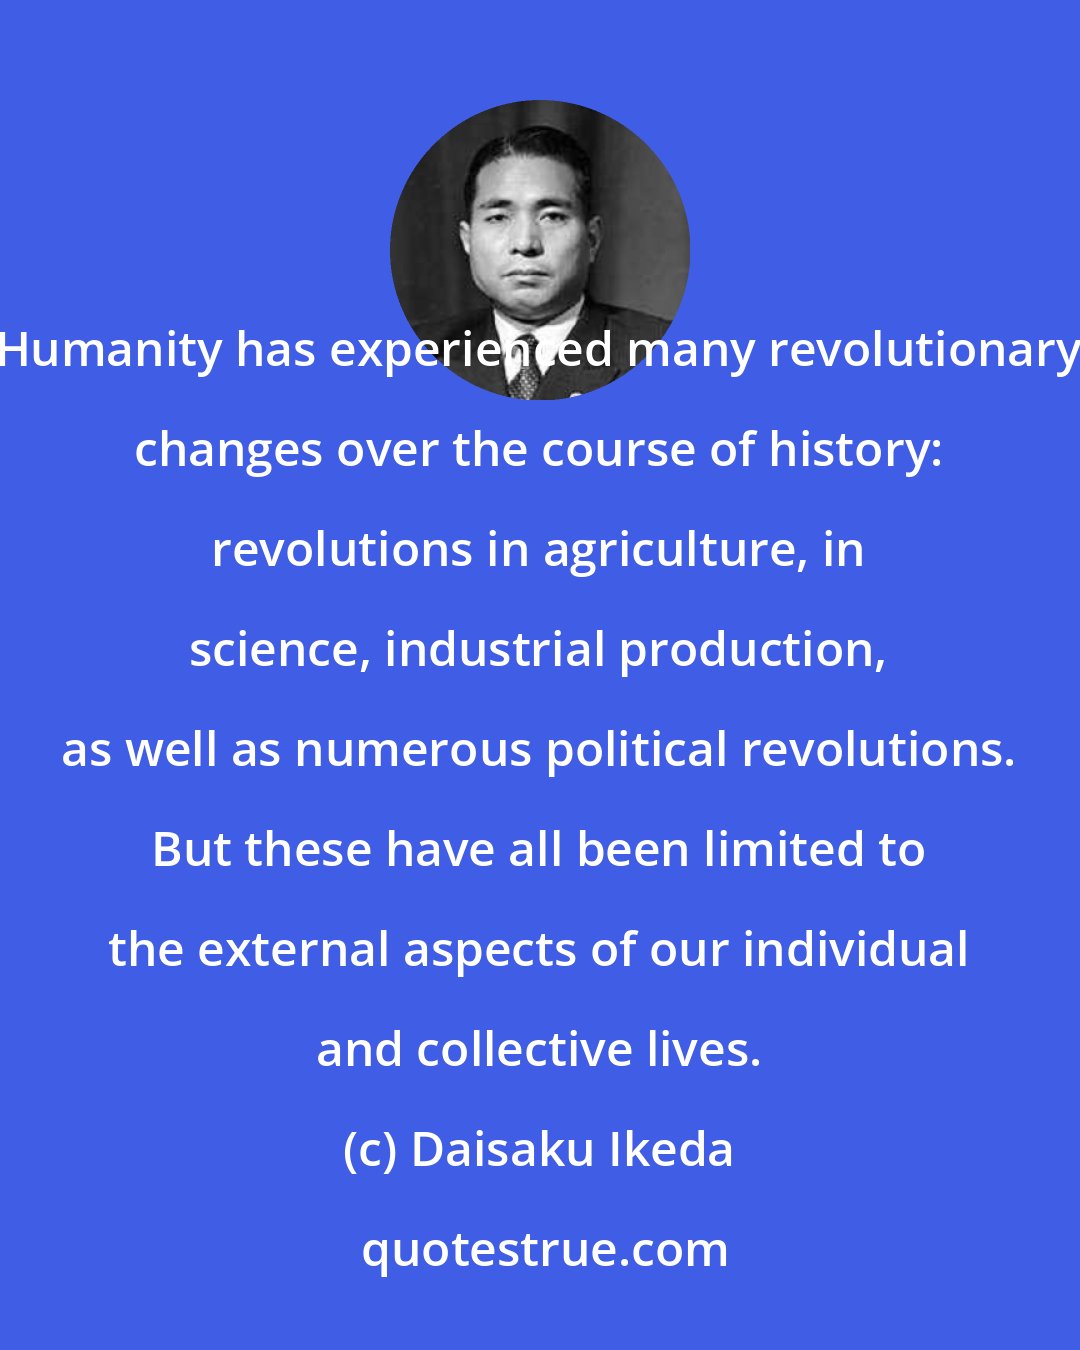 Daisaku Ikeda: Humanity has experienced many revolutionary changes over the course of history: revolutions in agriculture, in science, industrial production, as well as numerous political revolutions. But these have all been limited to the external aspects of our individual and collective lives.